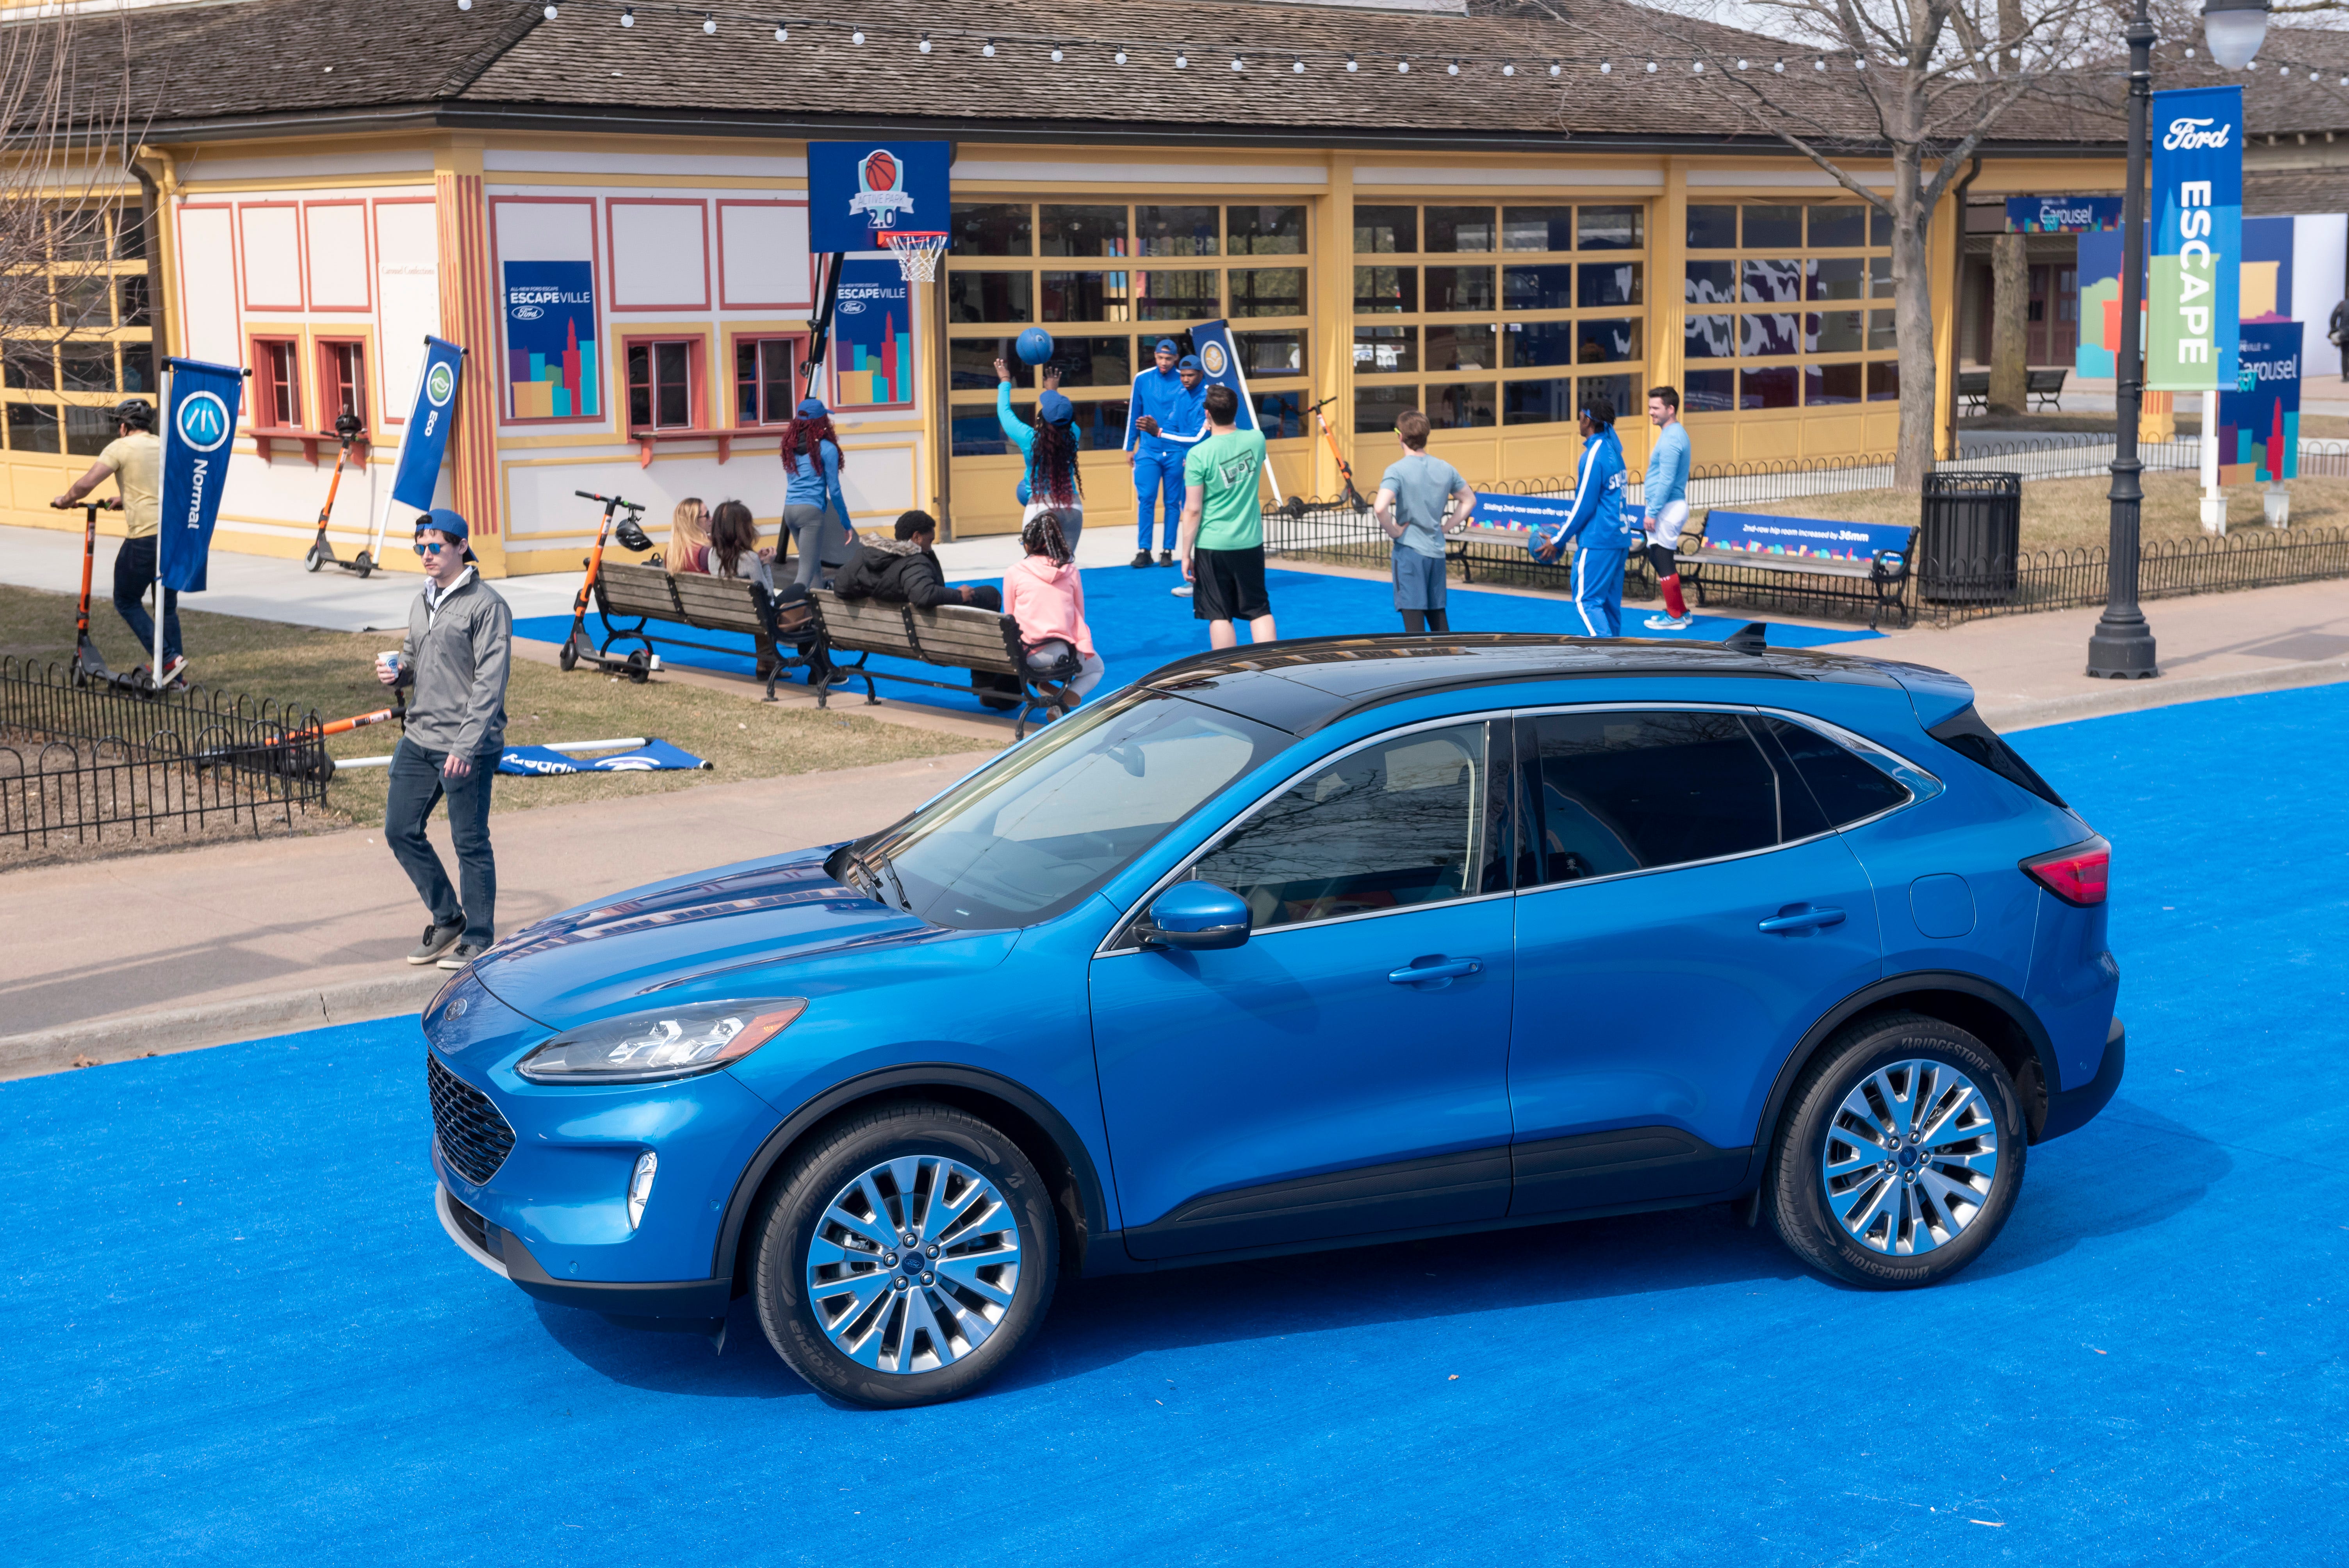 Performers, artists and actors spend time with the 2020 Ford Escape during a reveal of the vehicle at Greenfield Village.